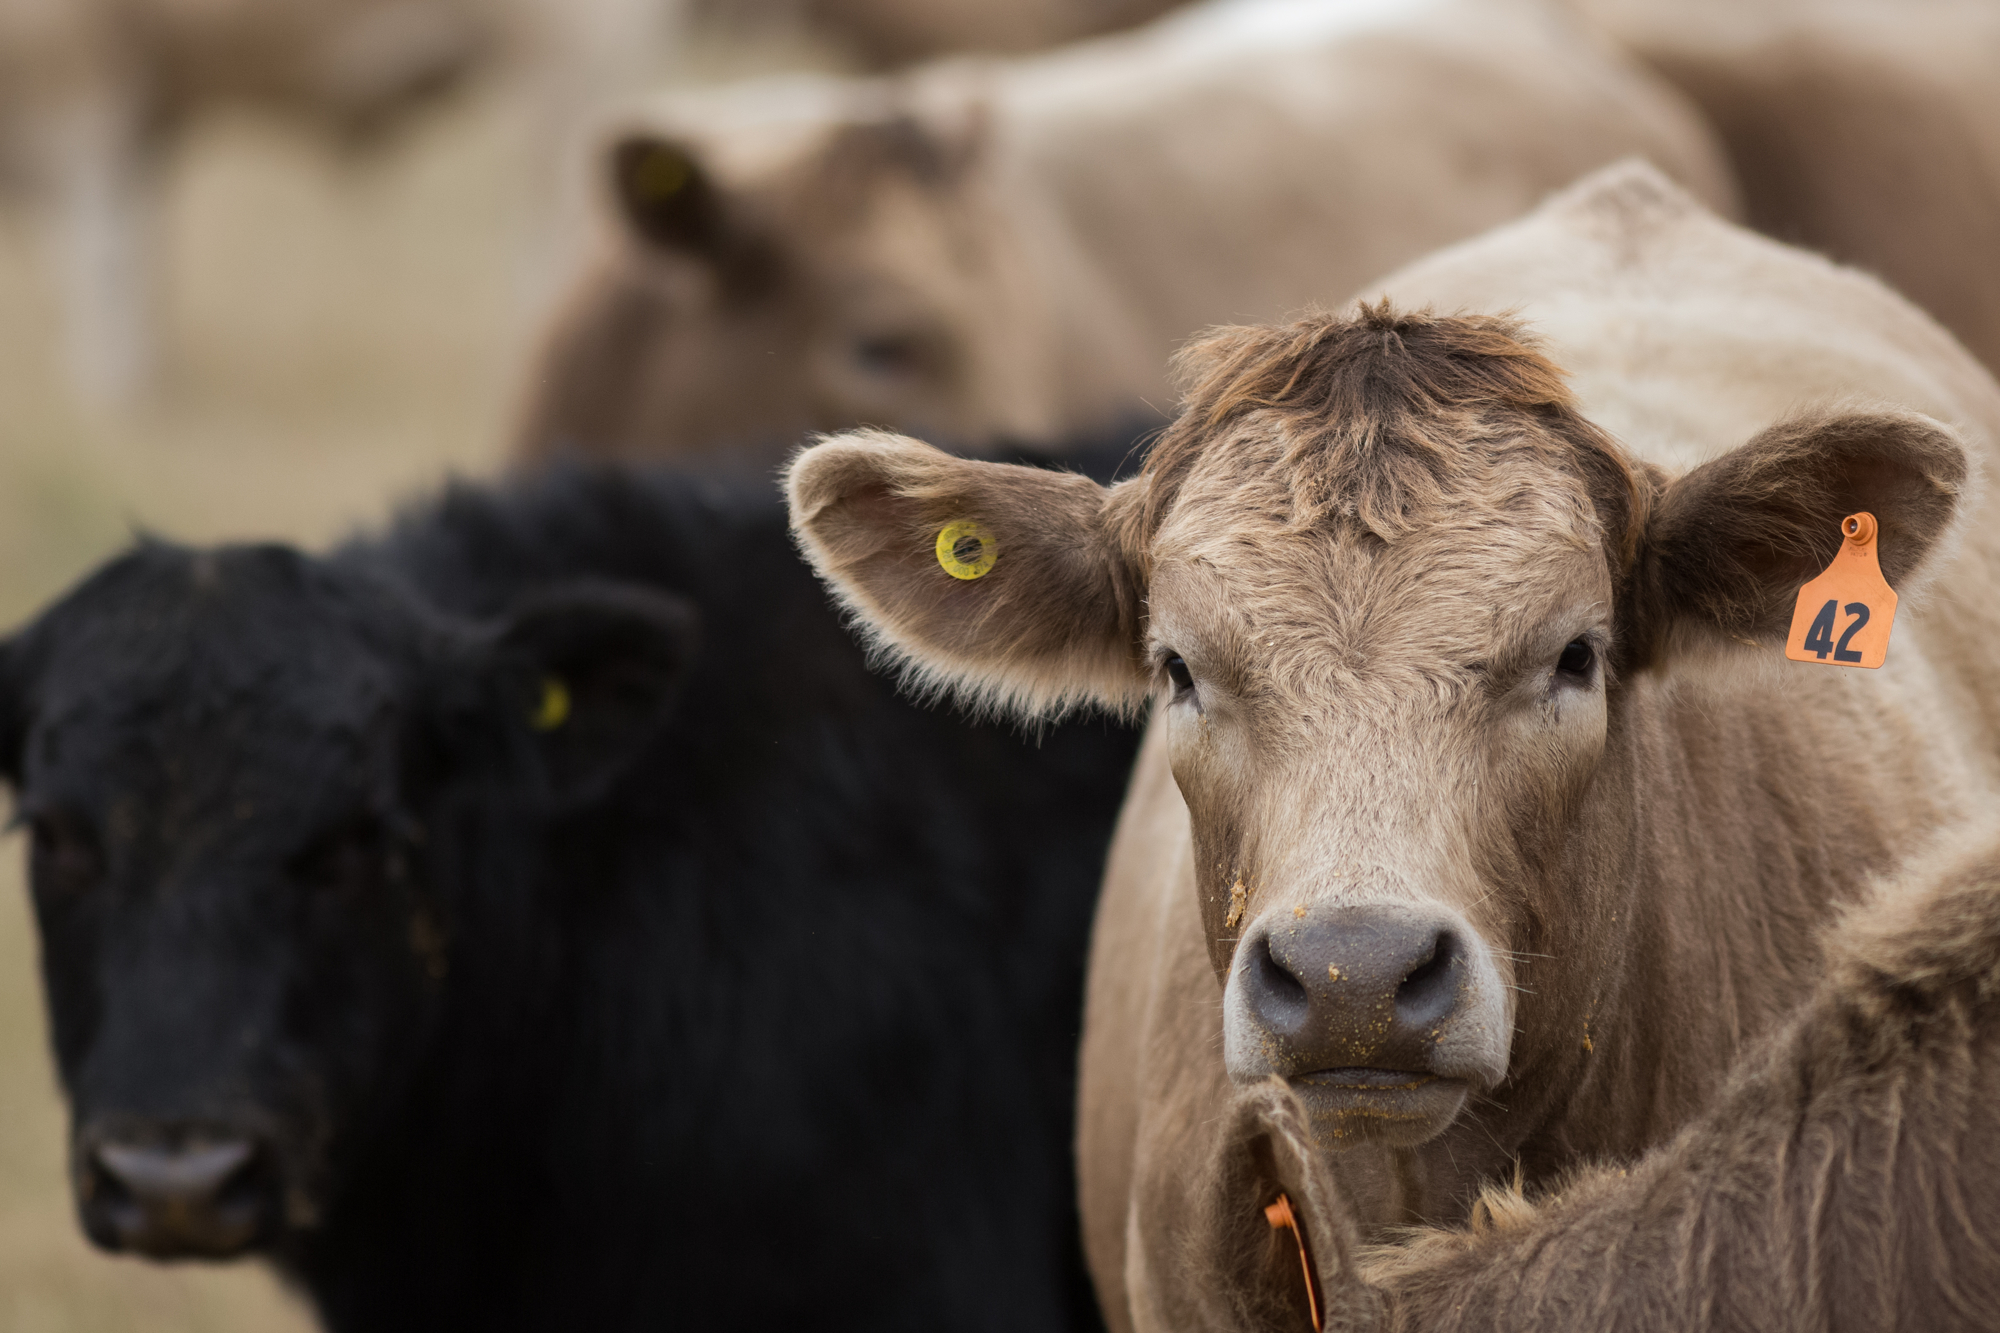 No Government, No Reports - Cattle Industry Flying Blind as USDA Reports Scrapped by Shutdown